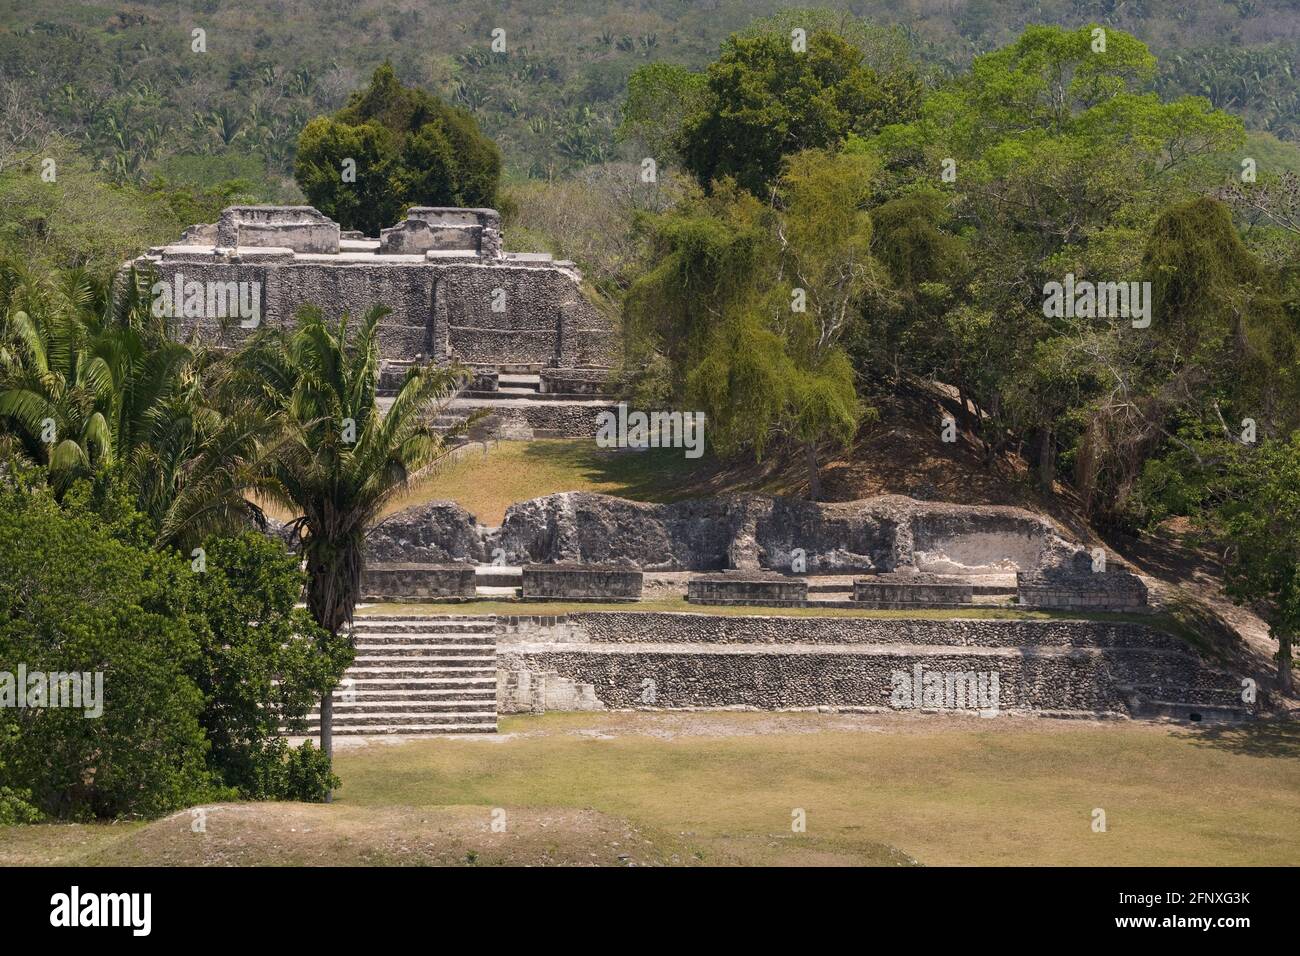 The main plaza seen from El Castillo at the Mayan ruins of Xunantunich. Mayan for The Stone Maiden, or Lady of the Rocks, the Mayan city was named aft Stock Photo